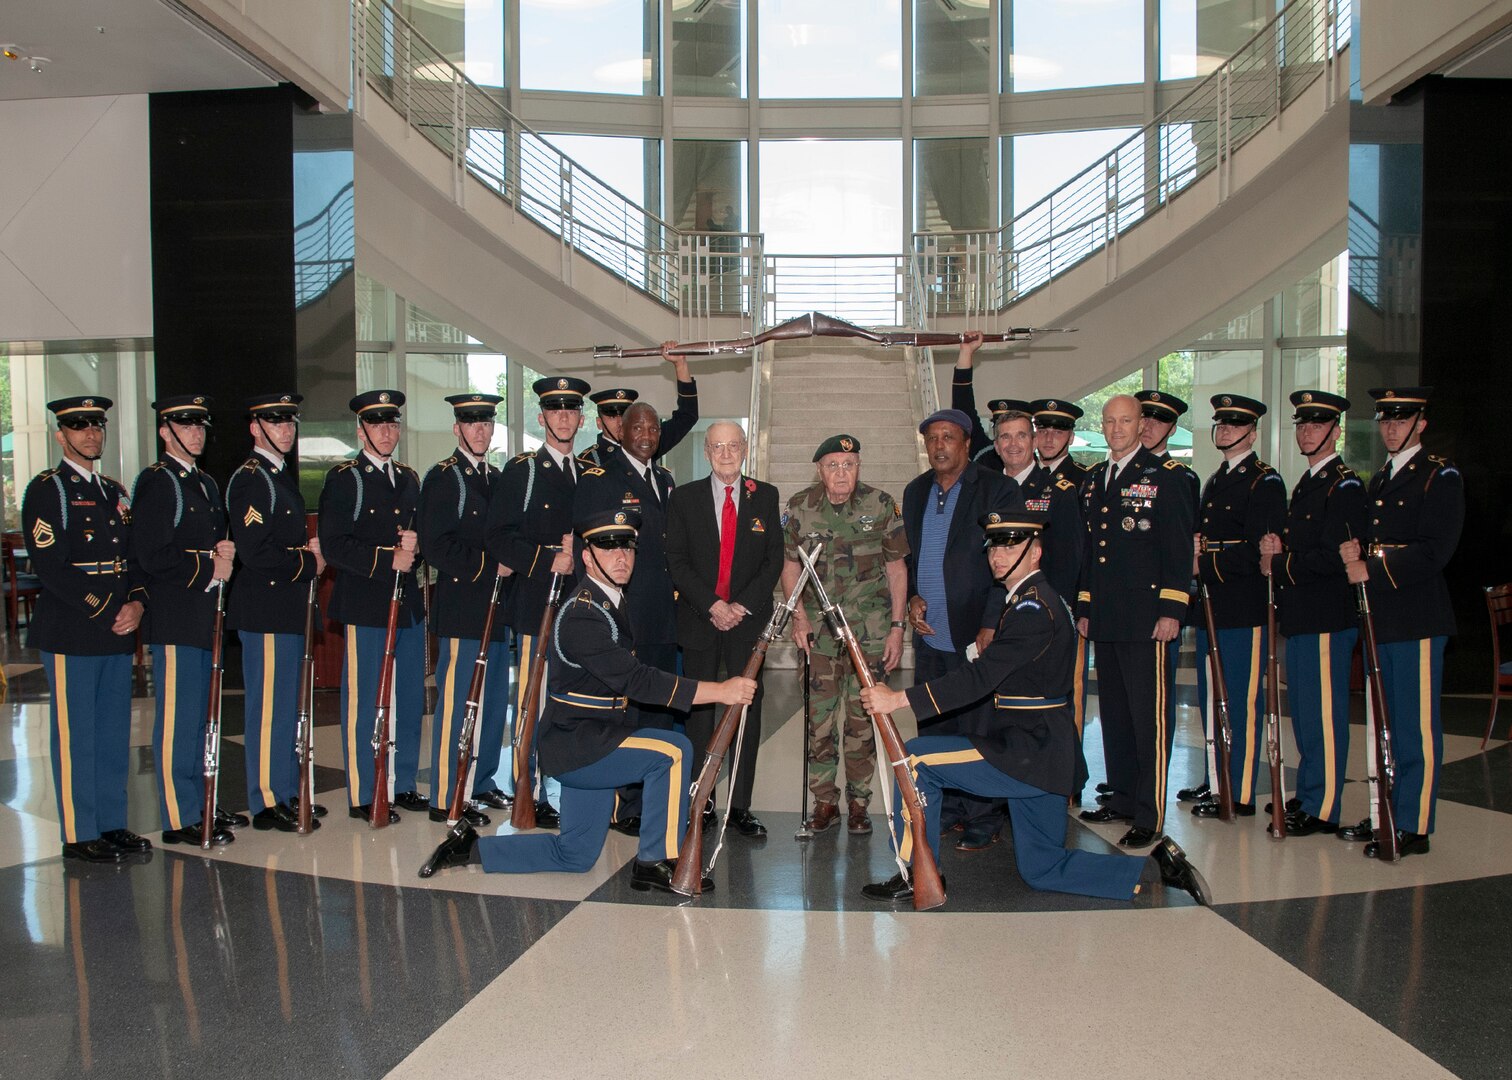 The U.S. Army Drill team poses for a photo with veterans Army Air Corps Master Sgt. Harry Miller (middle, left) and Army Sgt. 1st Class Rafael Lopez (middle, right) during a celebration of the Army’s 244th birthday at the McNamara Headquarters Complex June 11.